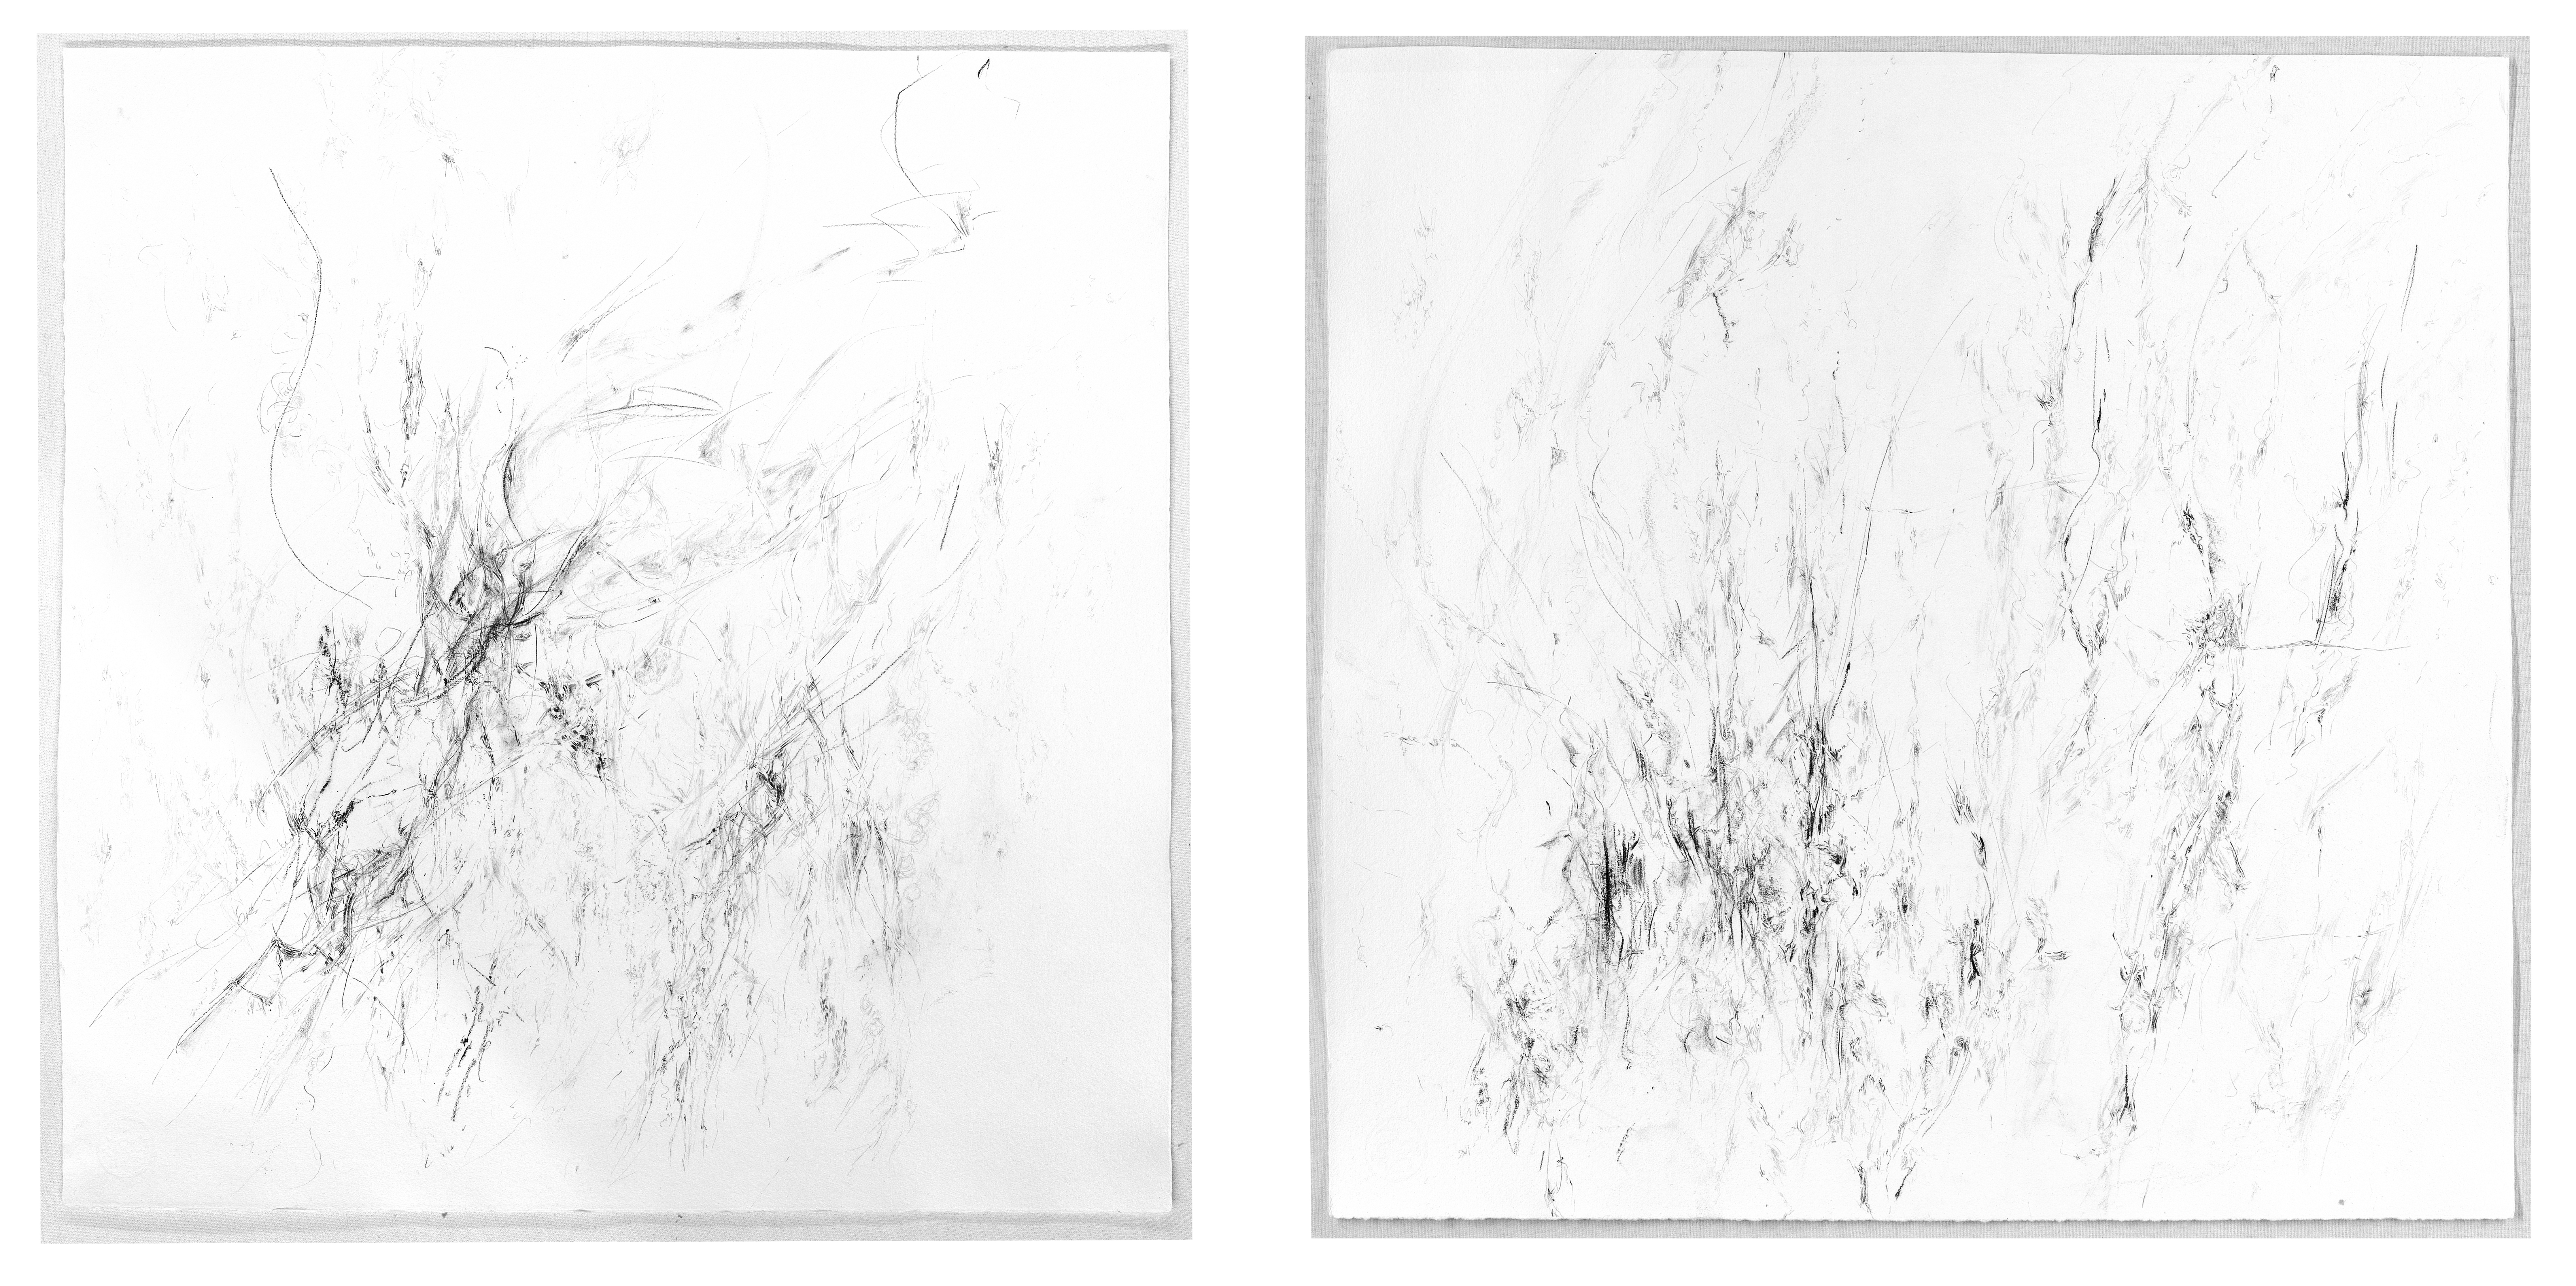 Indian ink, charcoal, pencil in paper
50 x 57 and 52 x 48,
2014